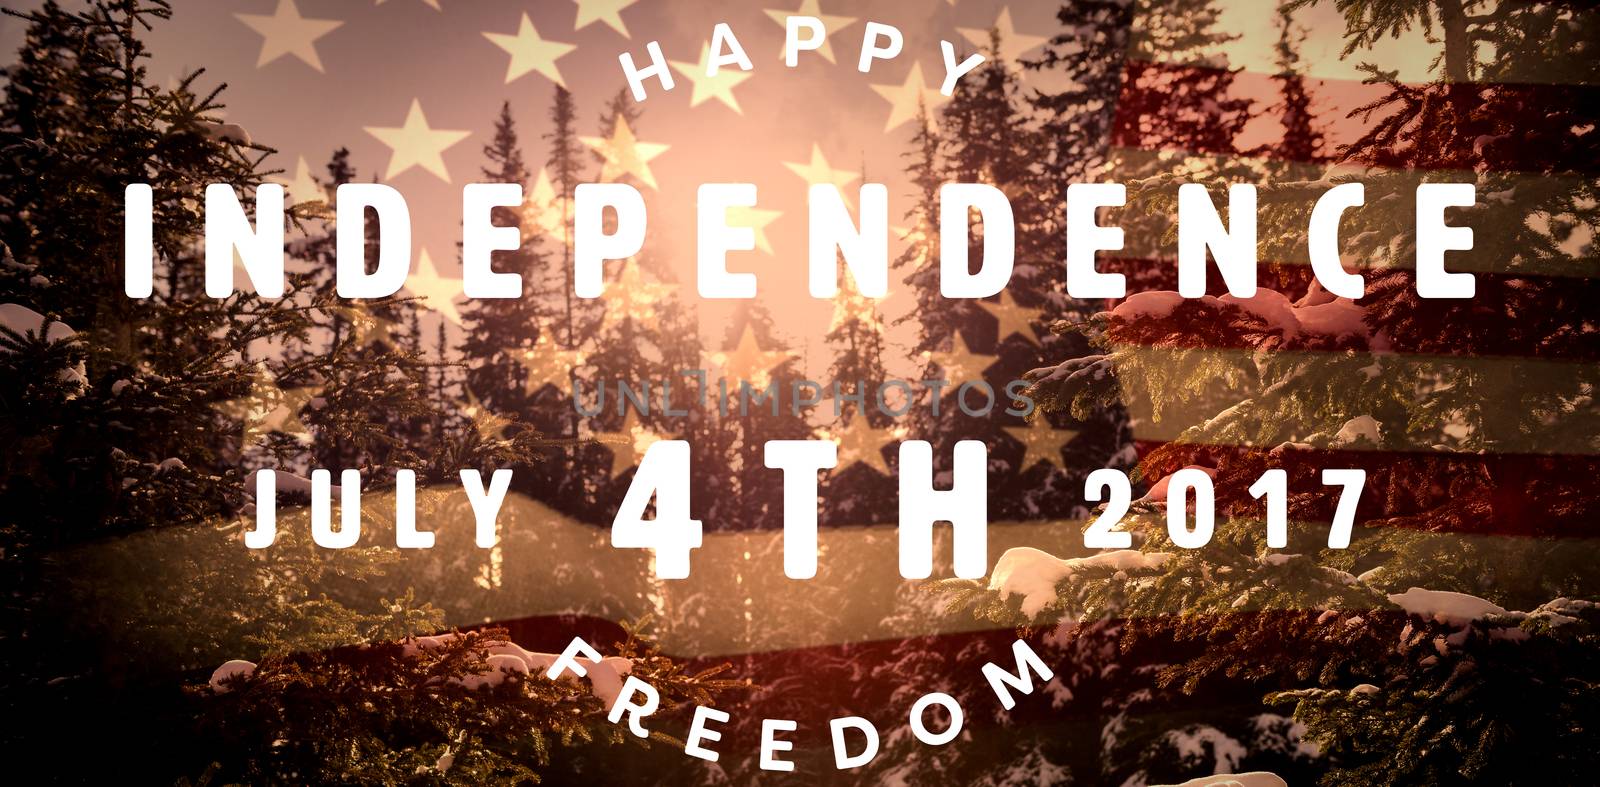 Computer graphic image of happy 4th of july text against united states of america flag